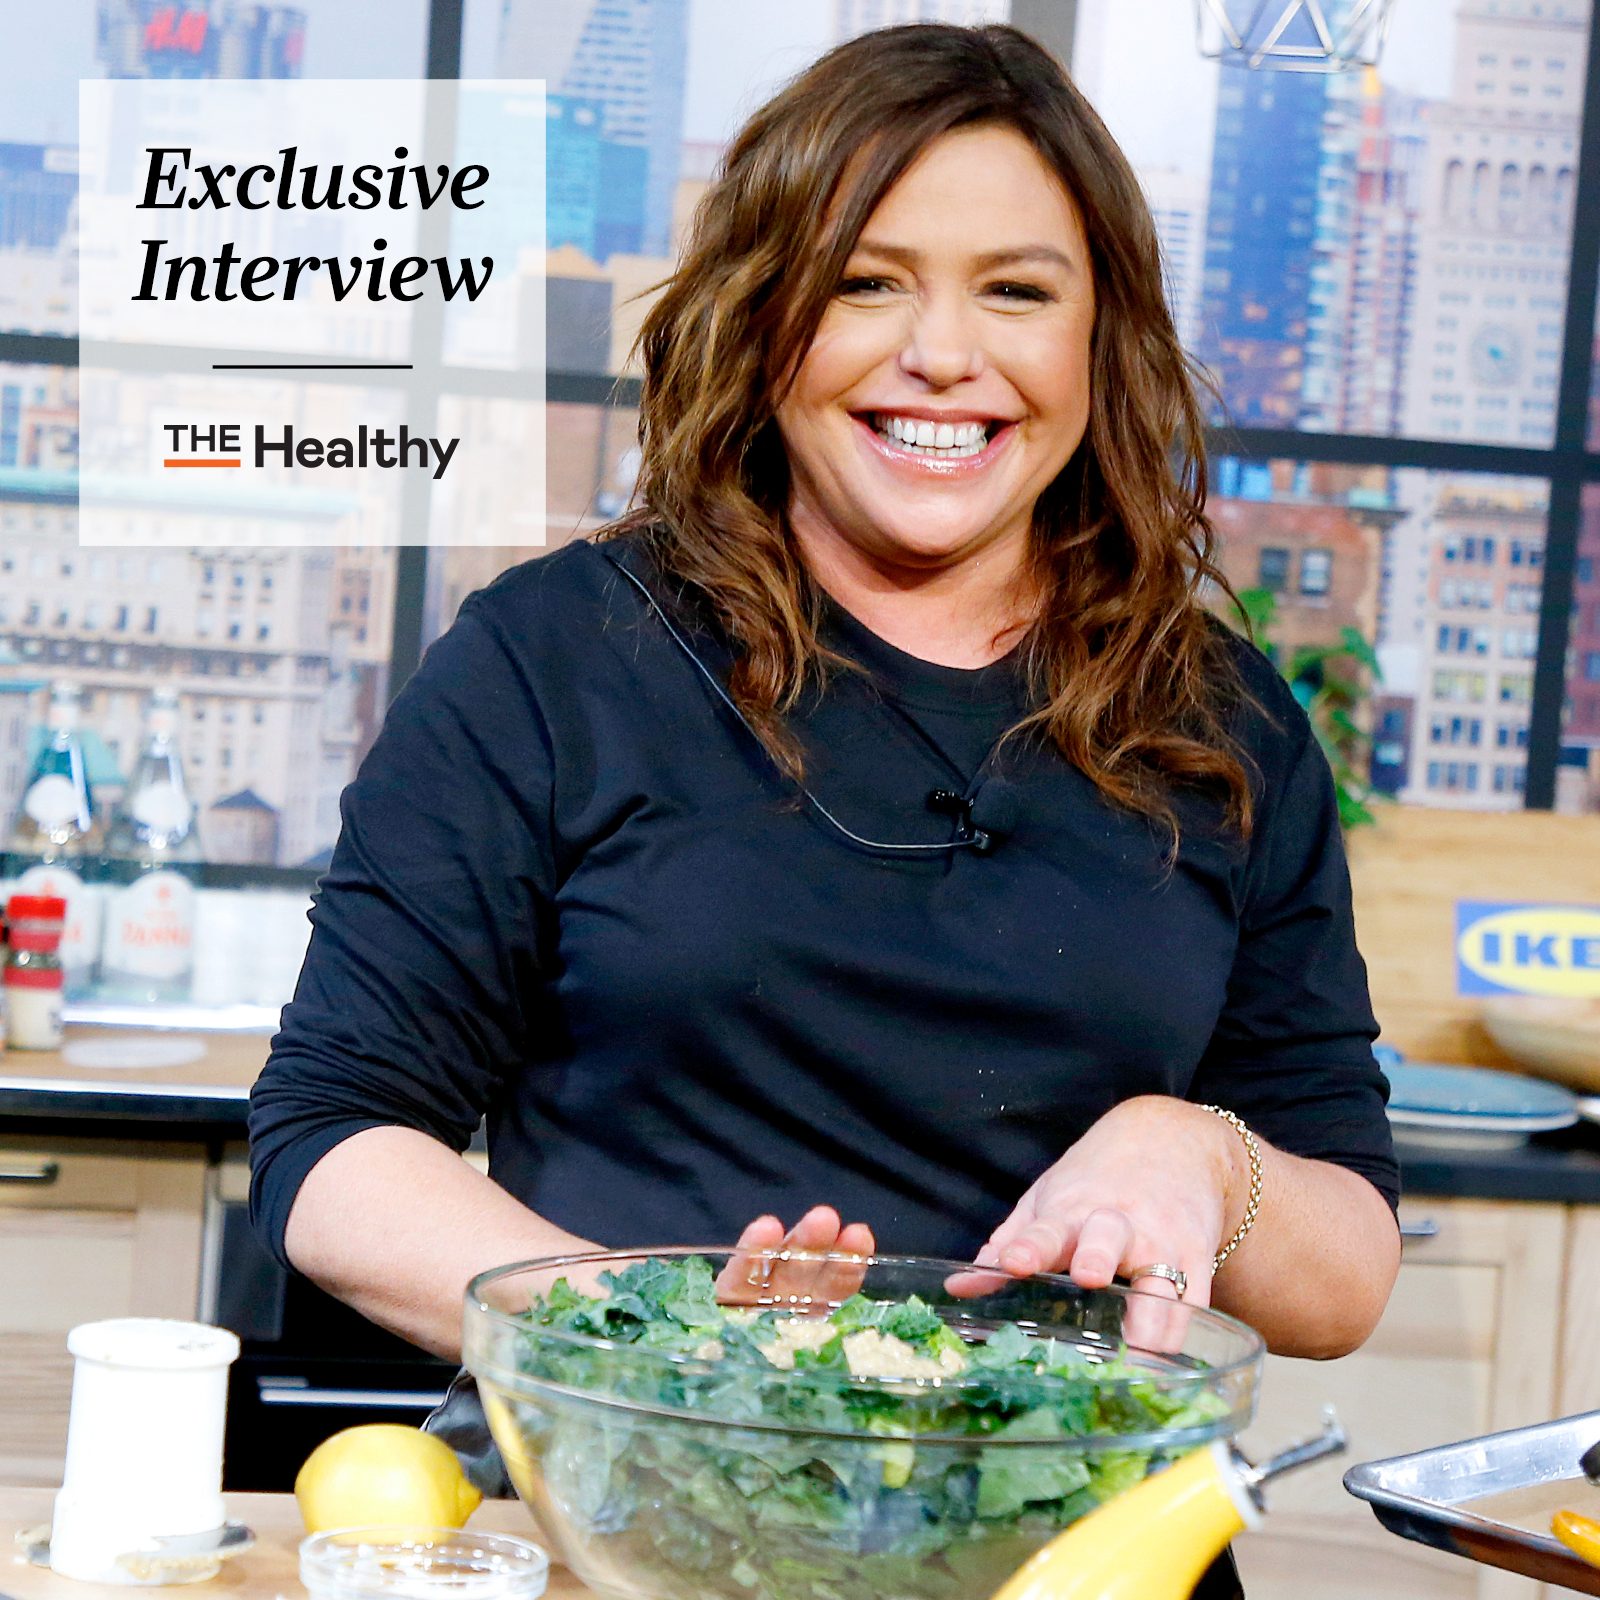 Rachael Ray on Ending Her Daytime Show & Her (Adorable) Recent Injury: "I'm Not Dead!"